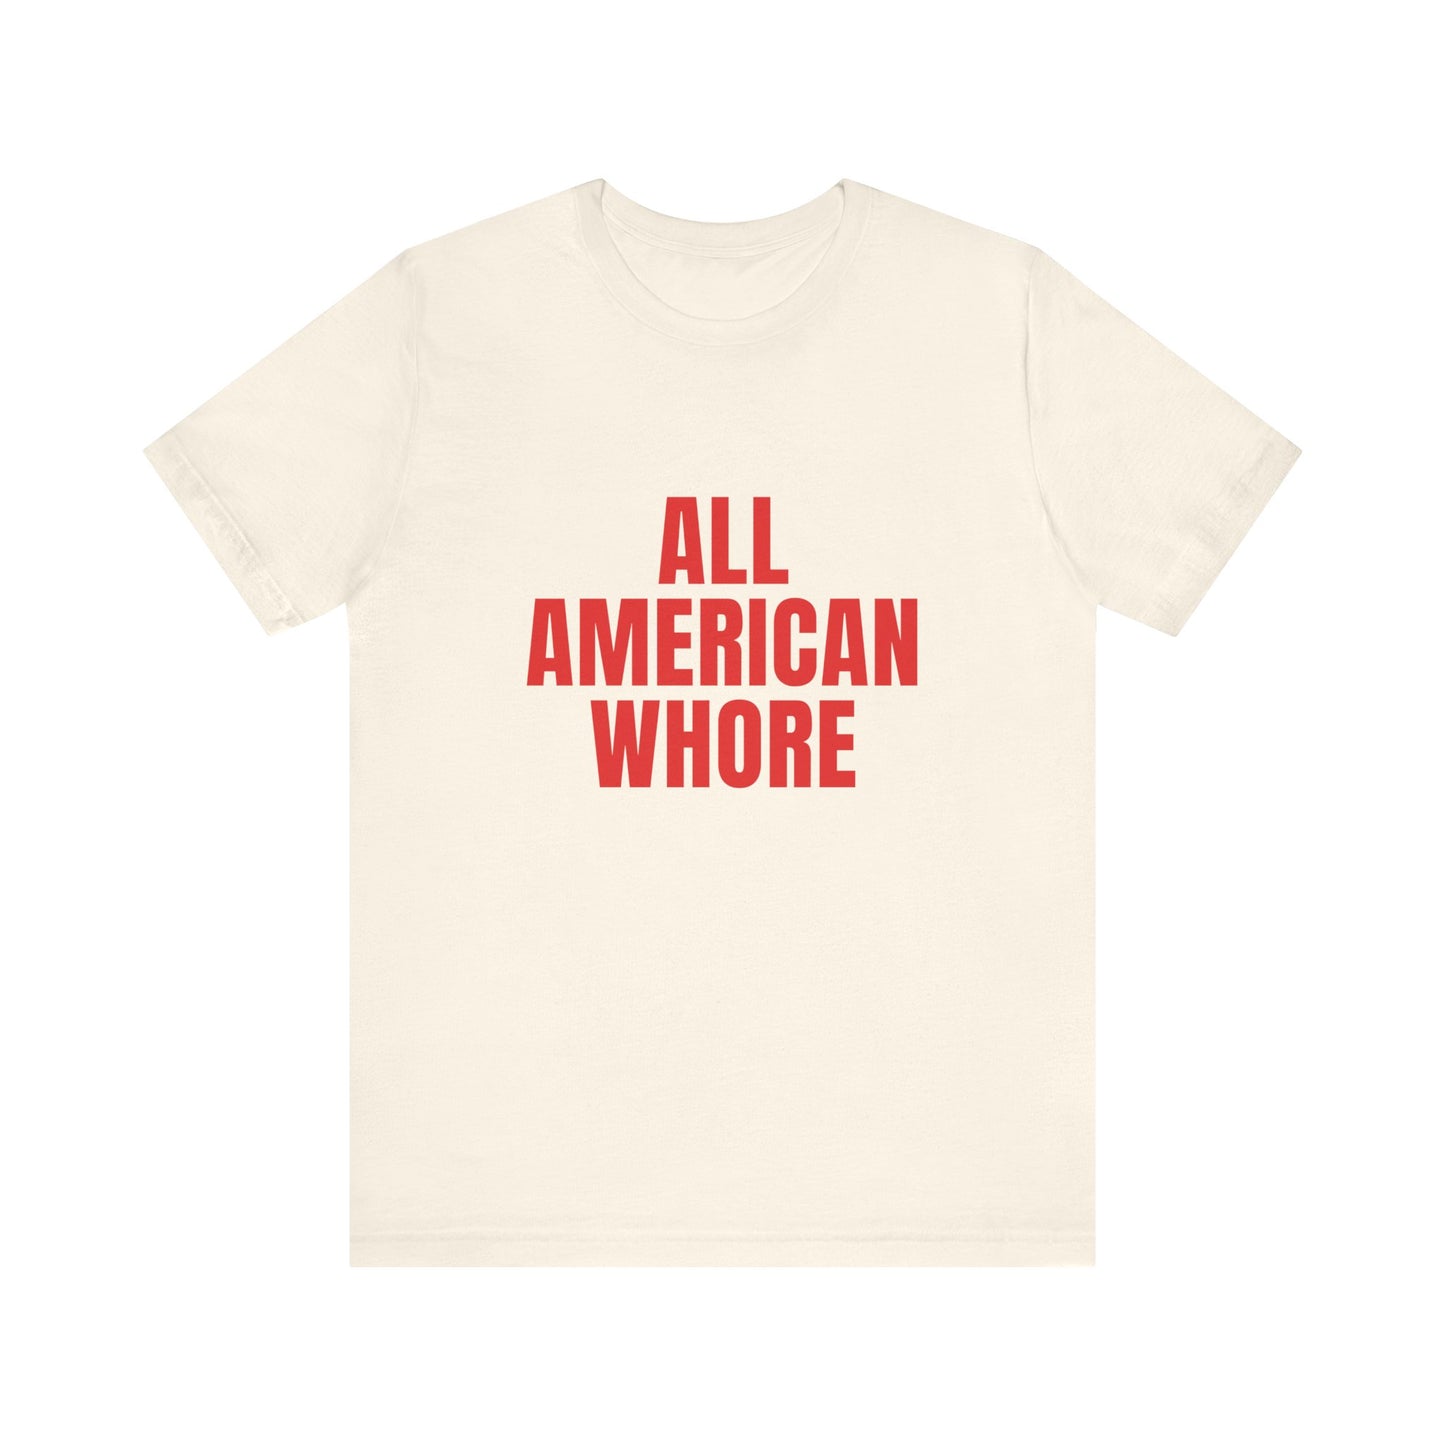 All American Whore - Unisex T-Shirt